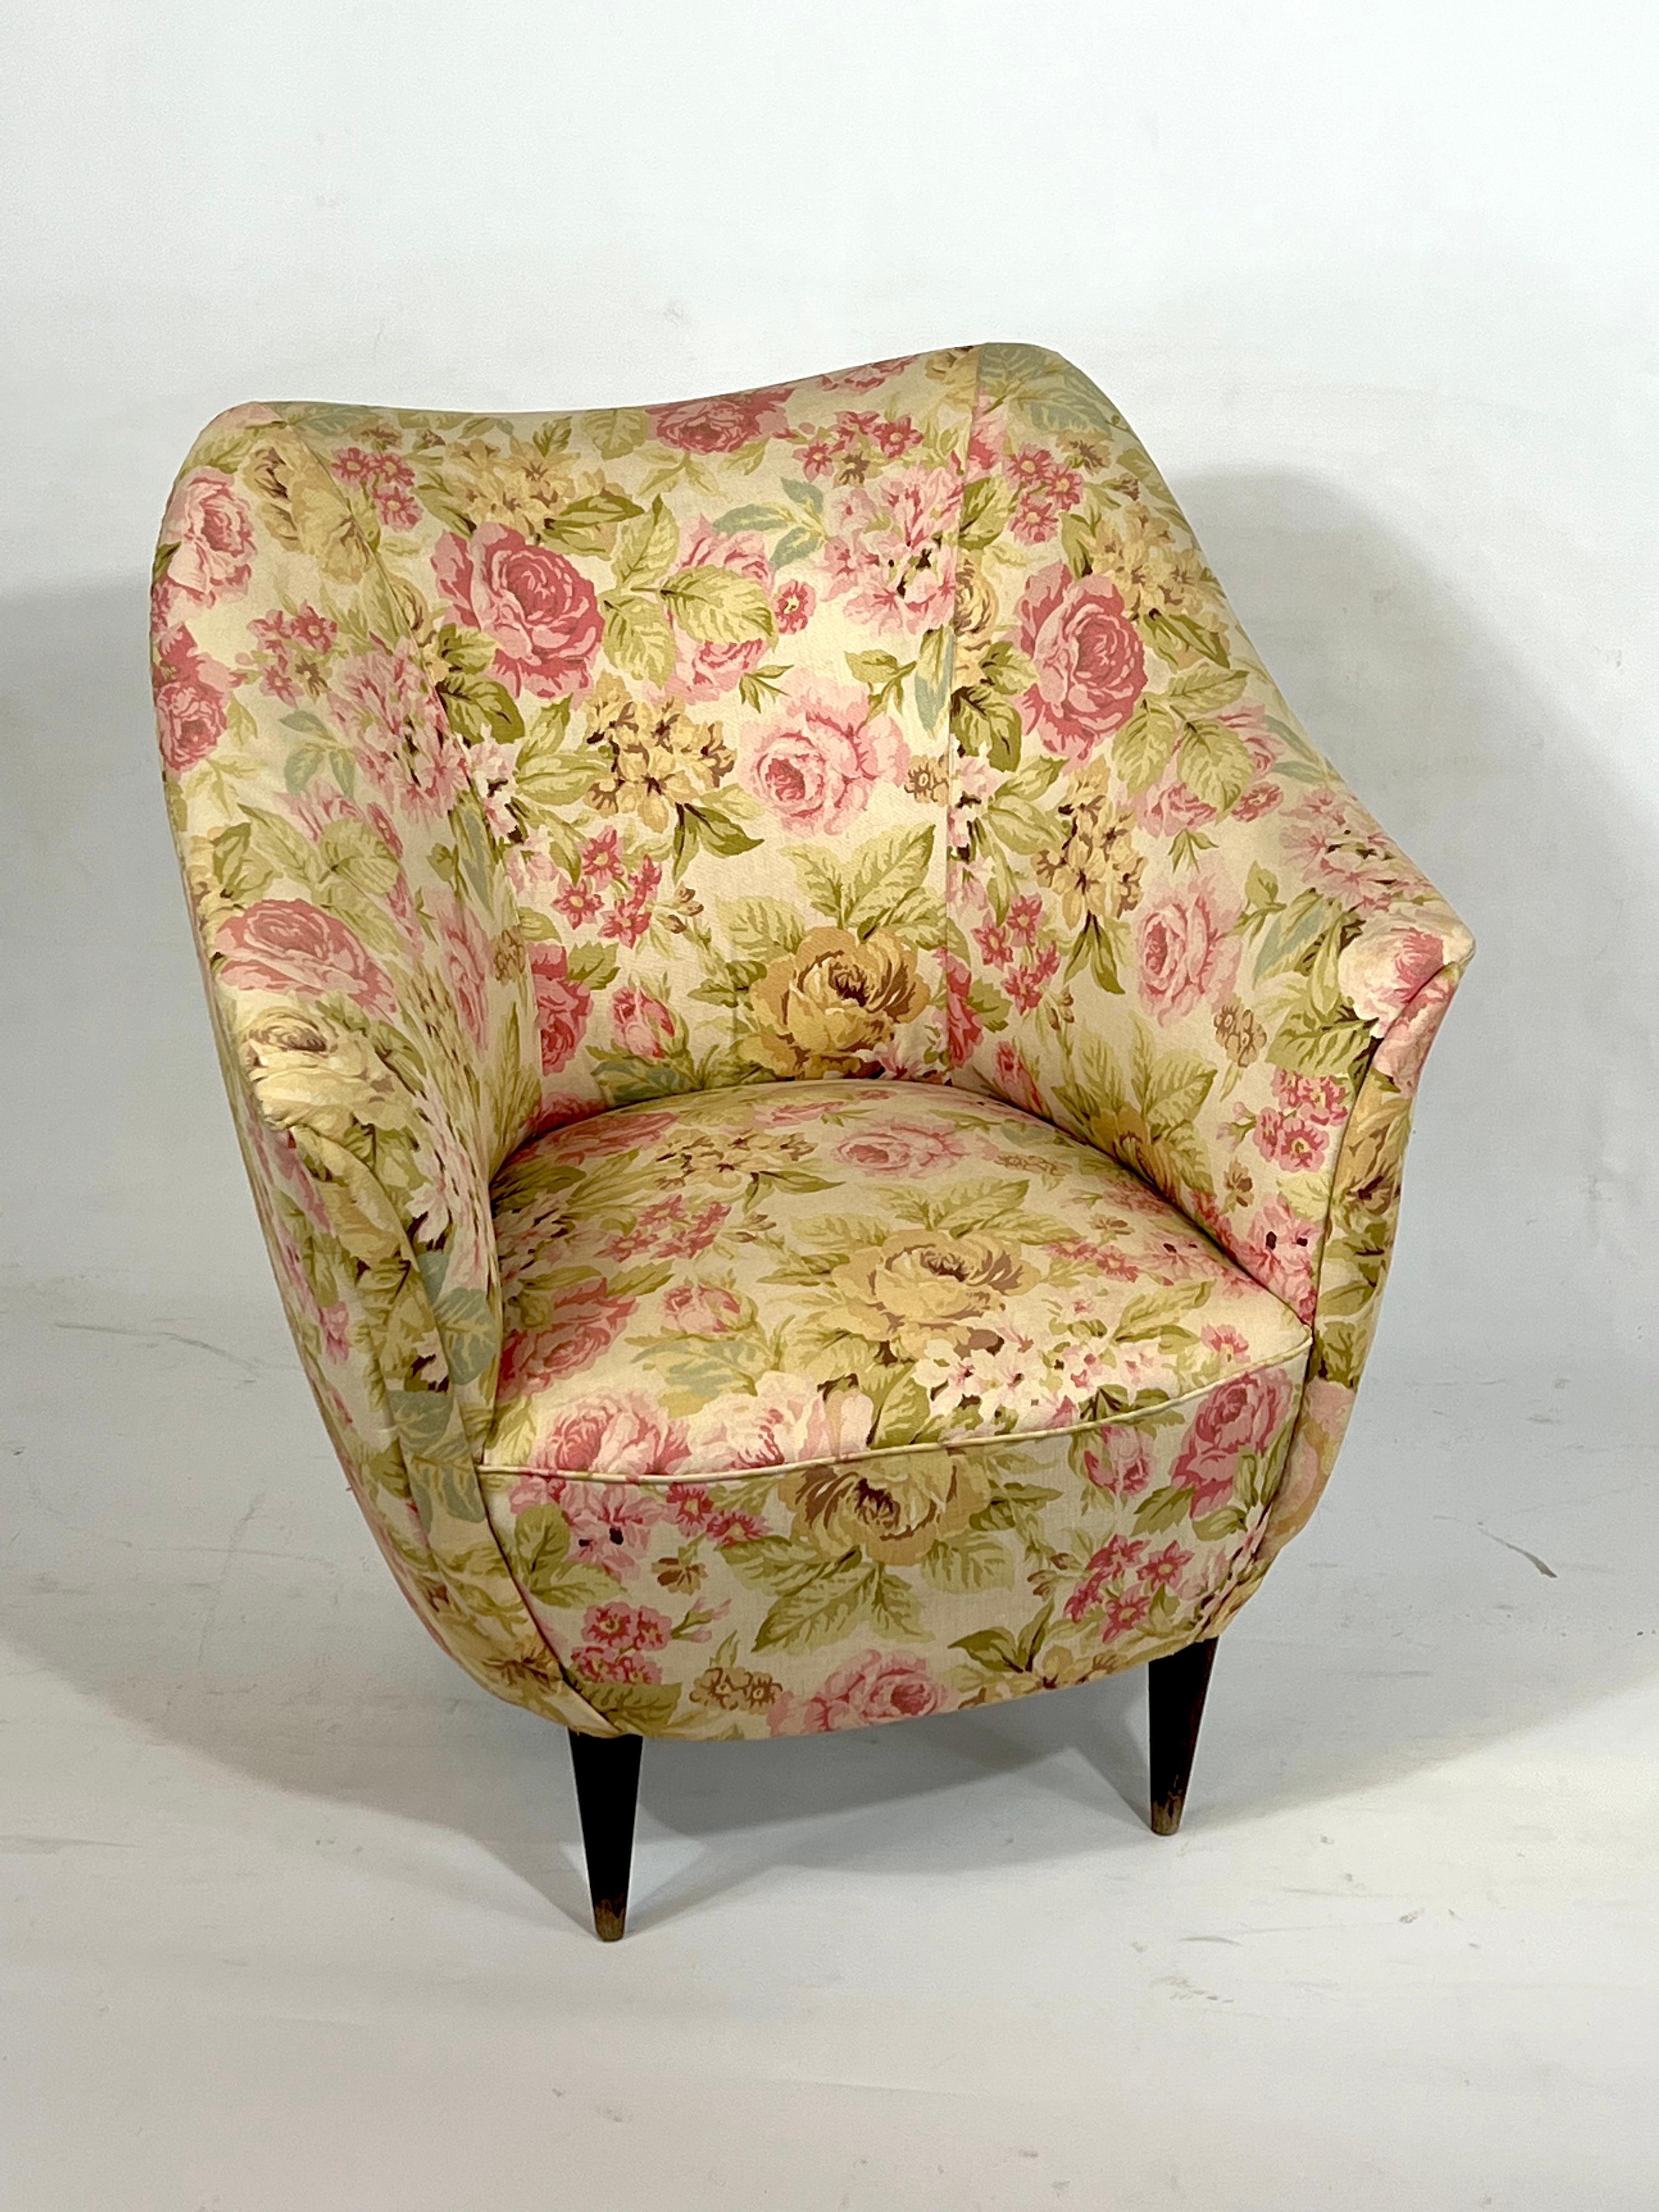 Great vintage condition for this armchair in the manner of Gio Ponti, manufactured in Italy during the 50s.